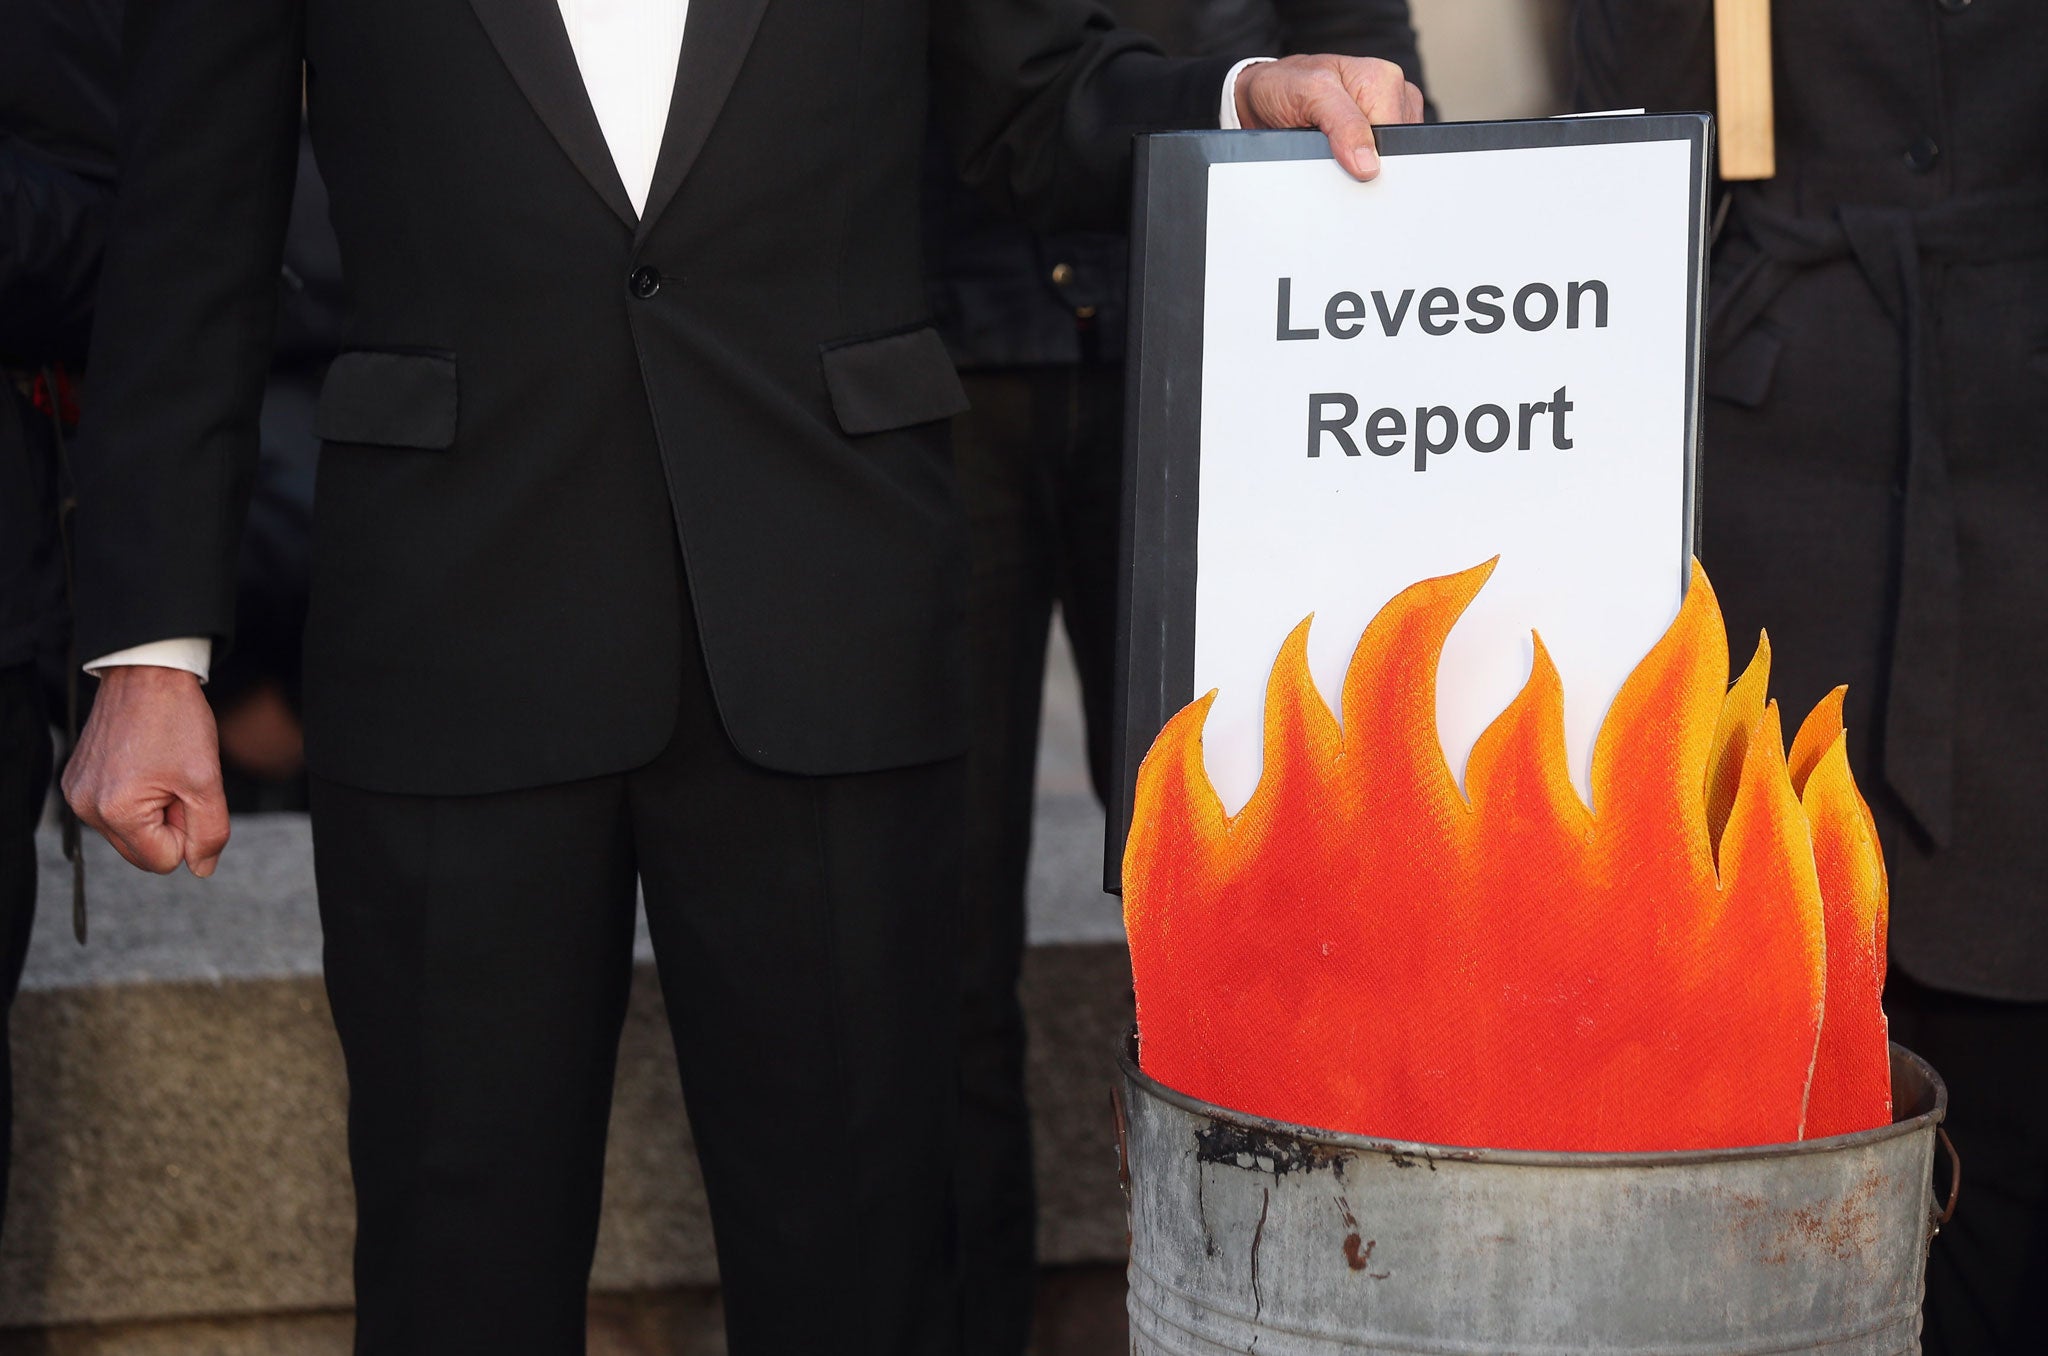 A protest group campaigning against the political dominance of Rupert Murdoch stage a mock burning of a copy of the Leveson Report outside the Queen Elizabeth II centre on November 29, 2012 in London, England.